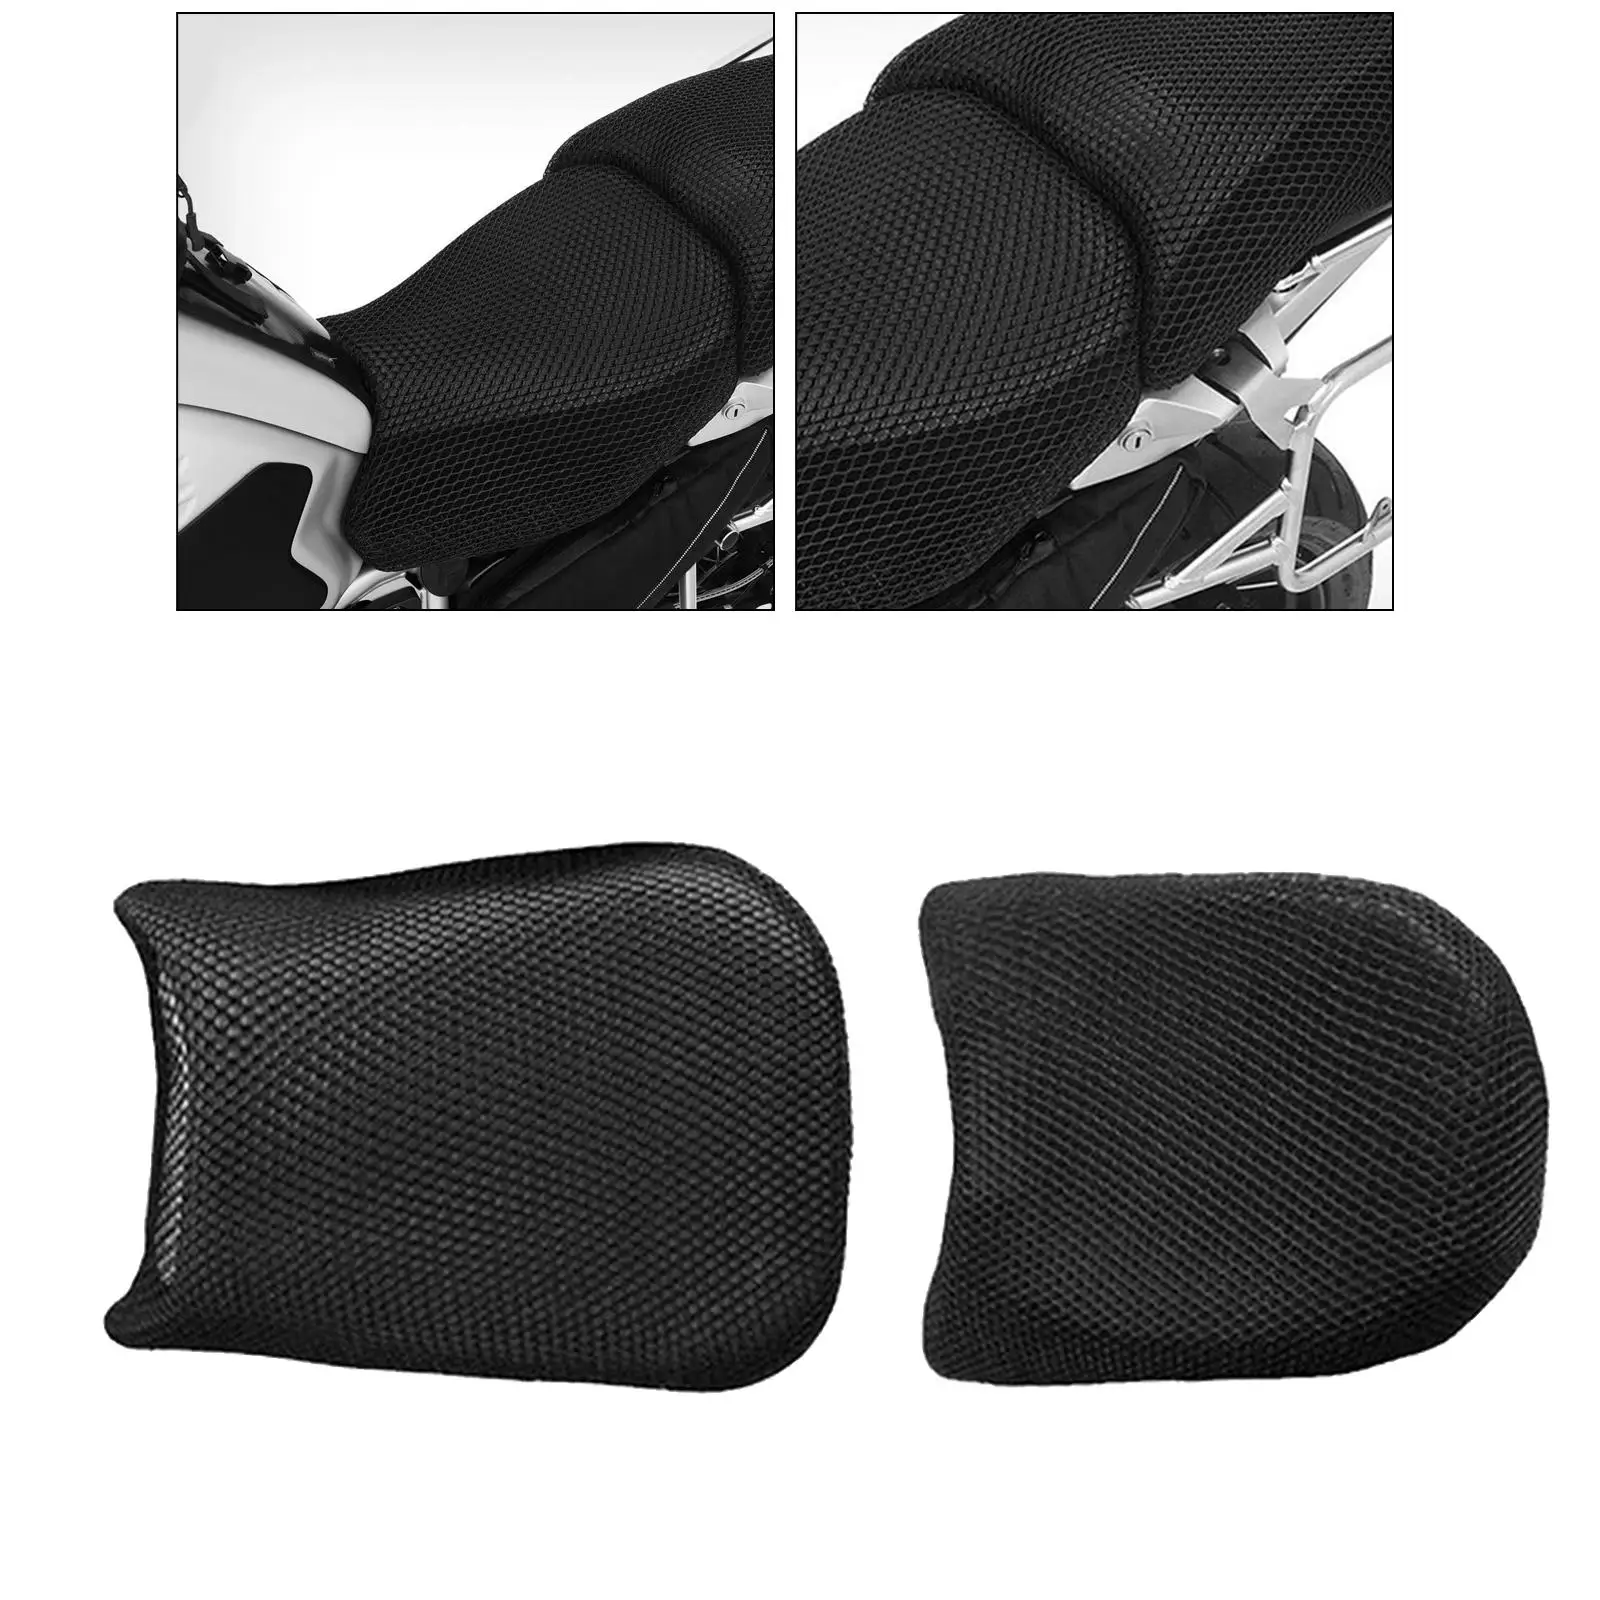 Motorcycle Bikes Protecting Pad Cover for R1200GS